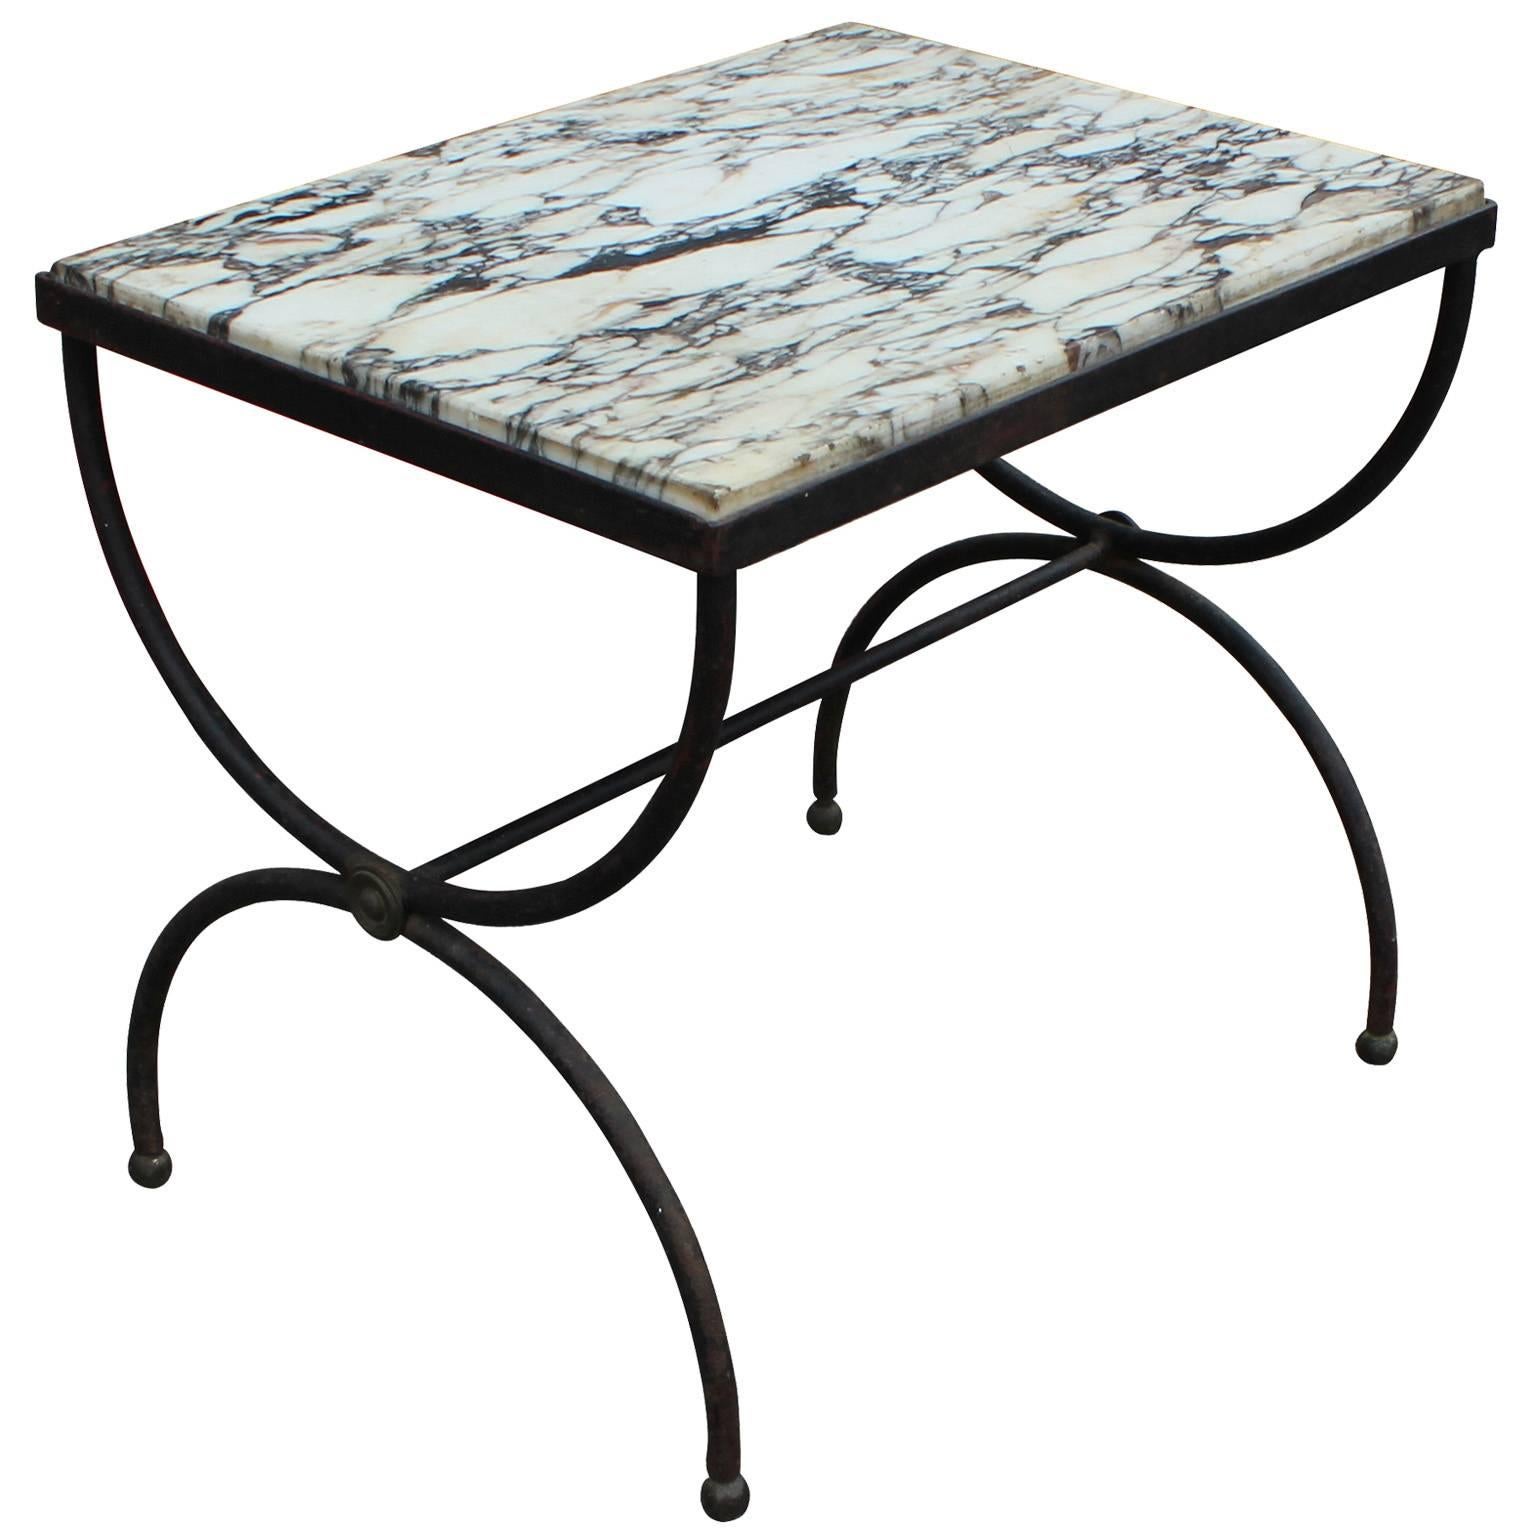 Fabulous pair of French side or end tables. Curved wrought iron "X" bases have the perfect patina. Topped in black and white marble.